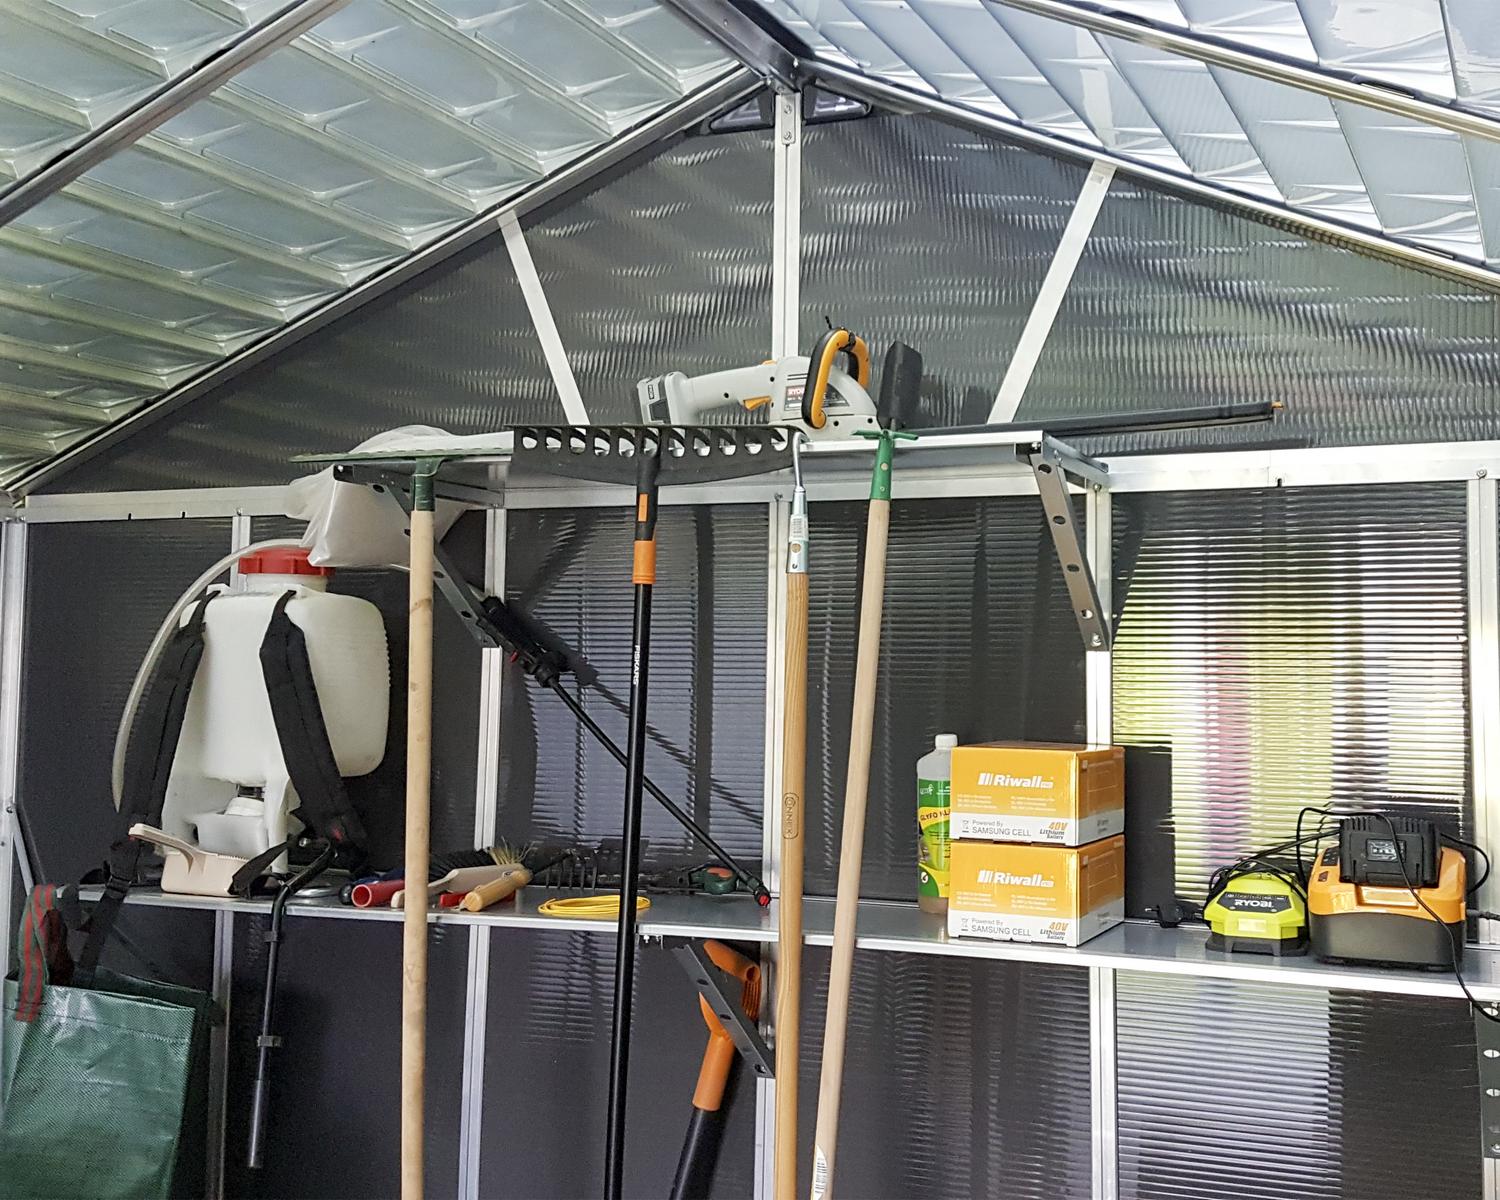 Organizing of tools in 11' x 17.2' plastic storage shed with a skylight roof